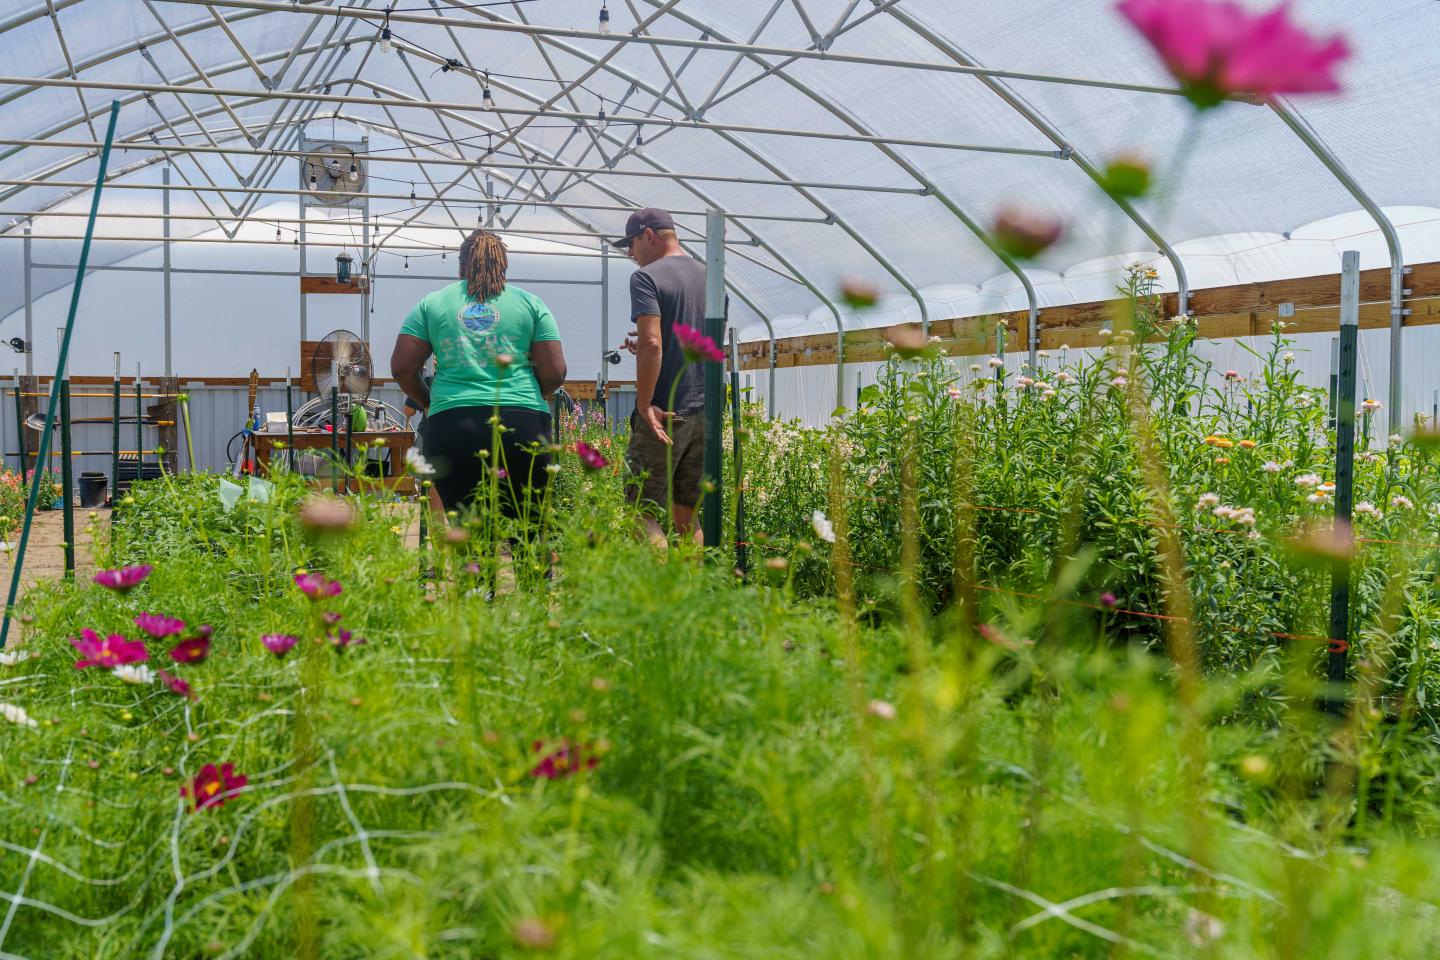 Sydney Lockett (left), district conservationist with USDA’s Natural Resources Conservation Service, and Nick Kleiman, who operates Floral Compass Flower Farm in Fountaintown, Indiana along with his wife, talk about the farm’s high tunnel during a visit to the farm June 28, 2022.